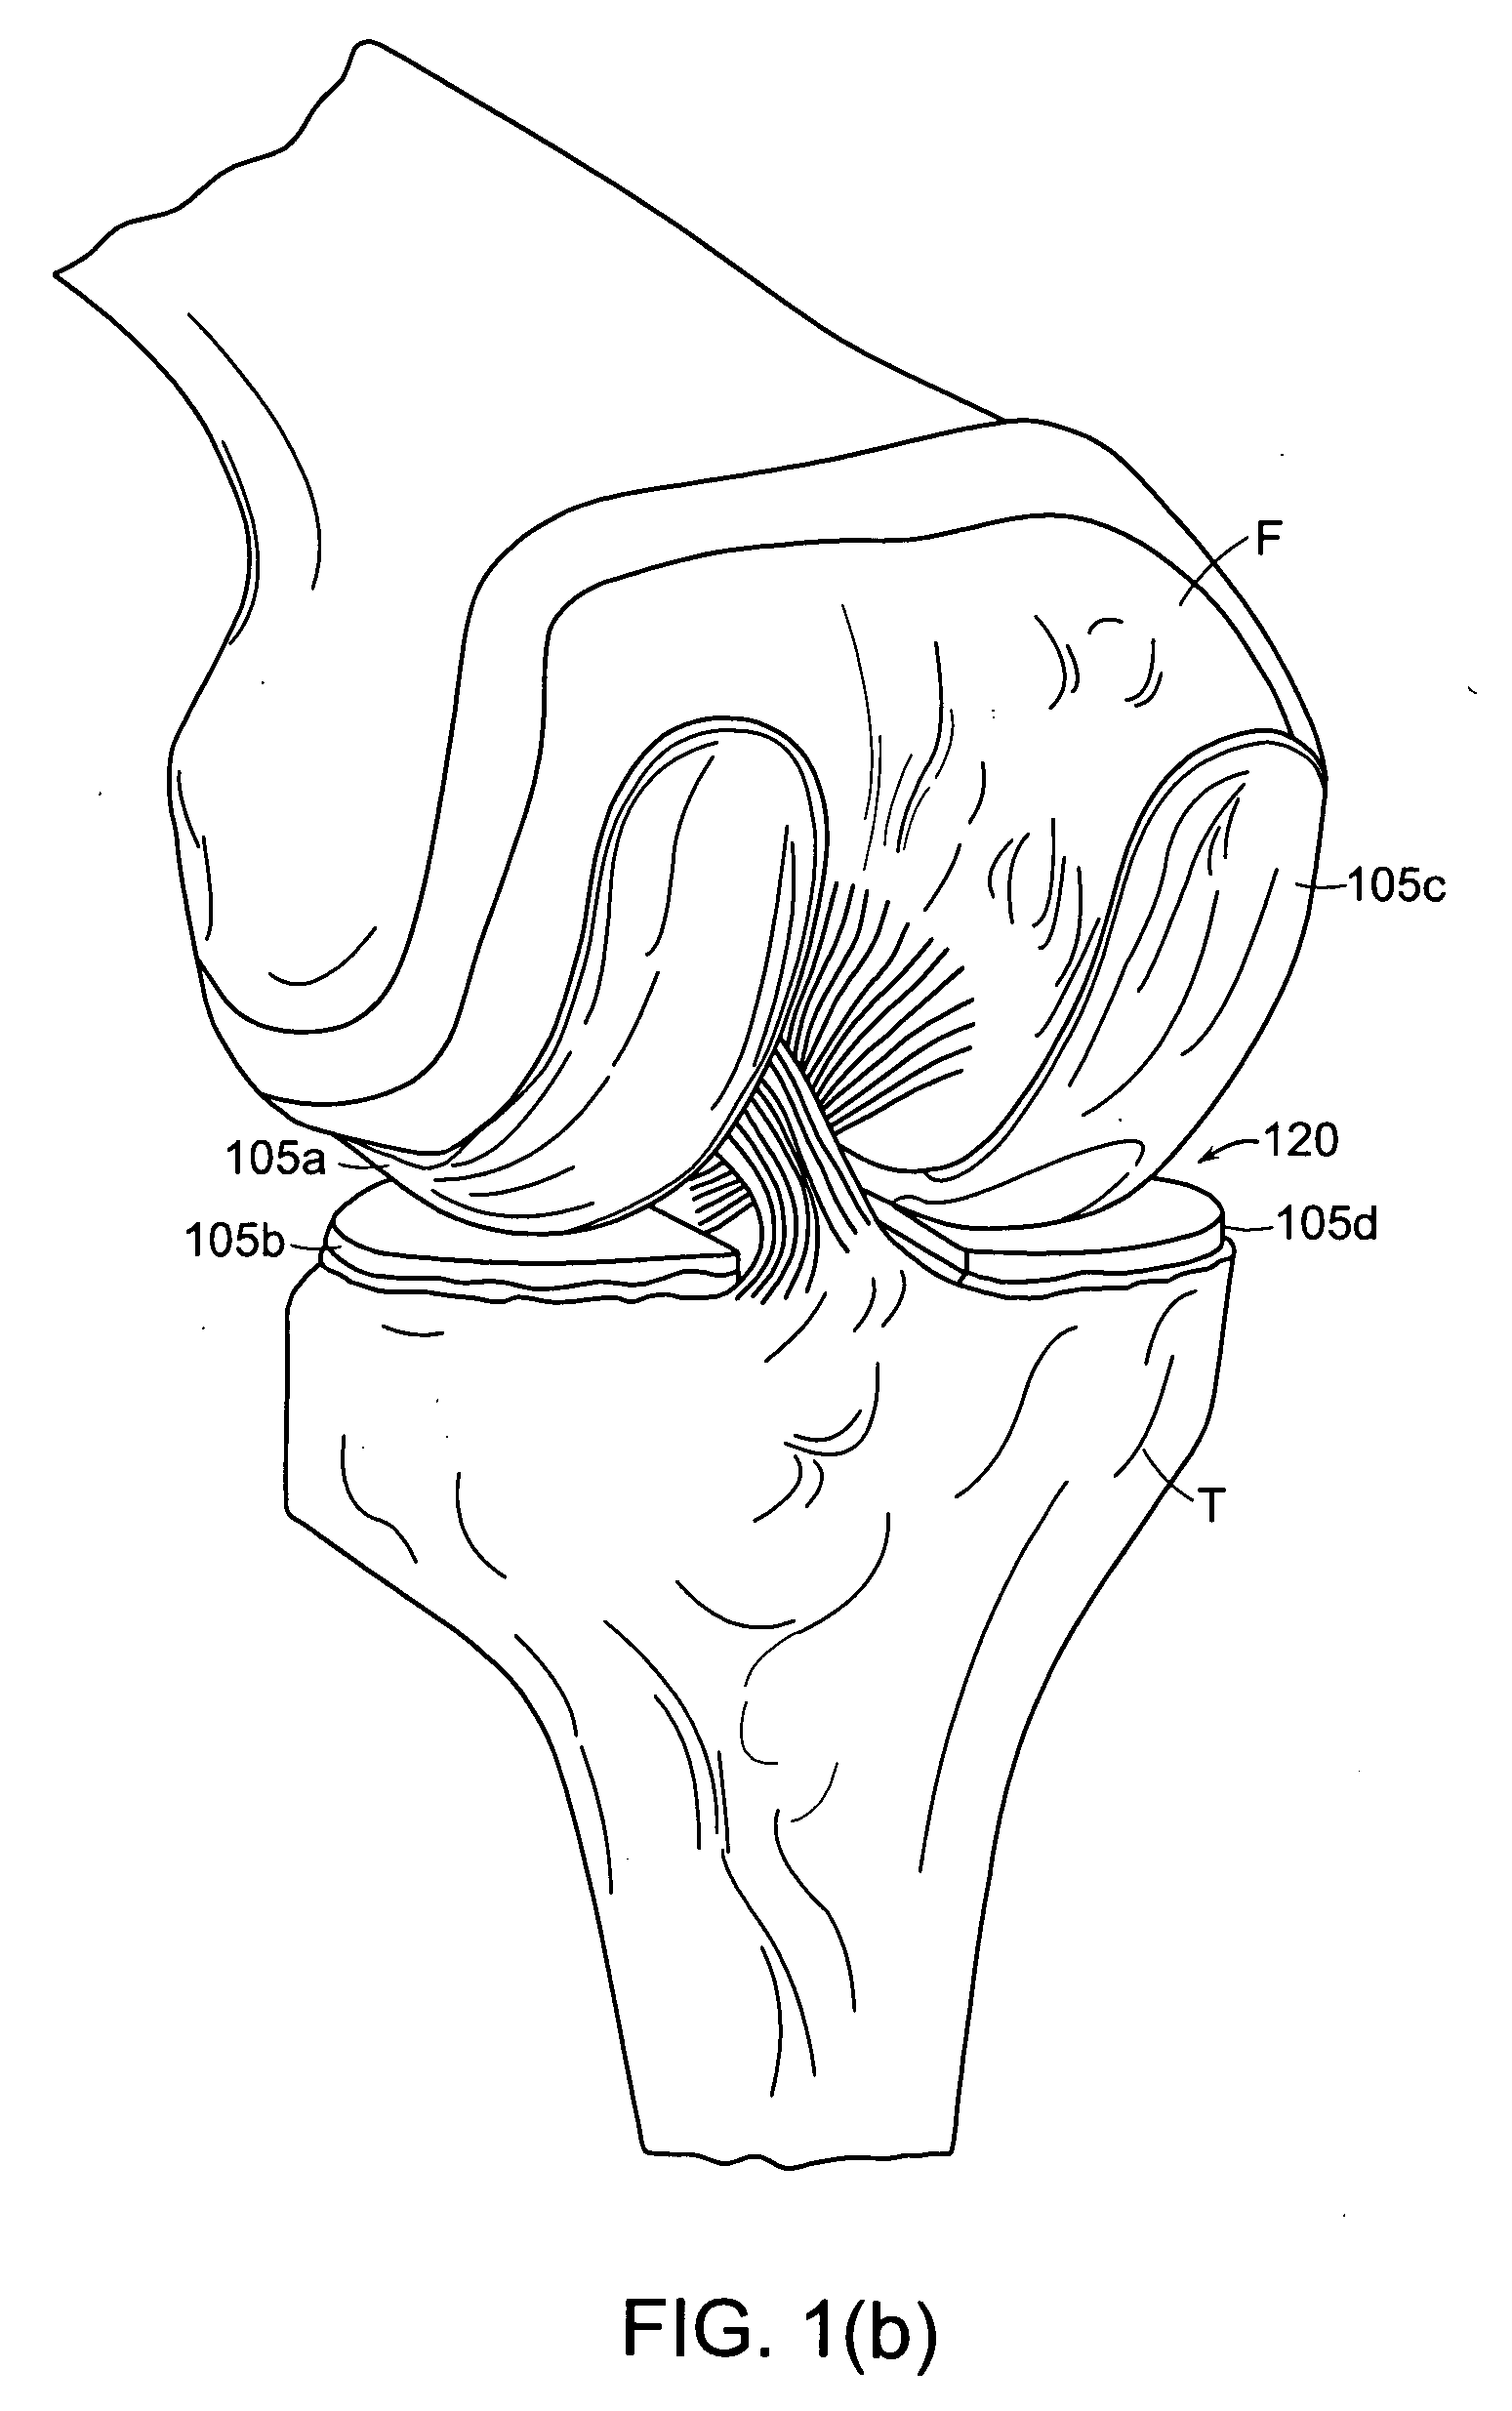 Implant planning using corrected captured joint motion information